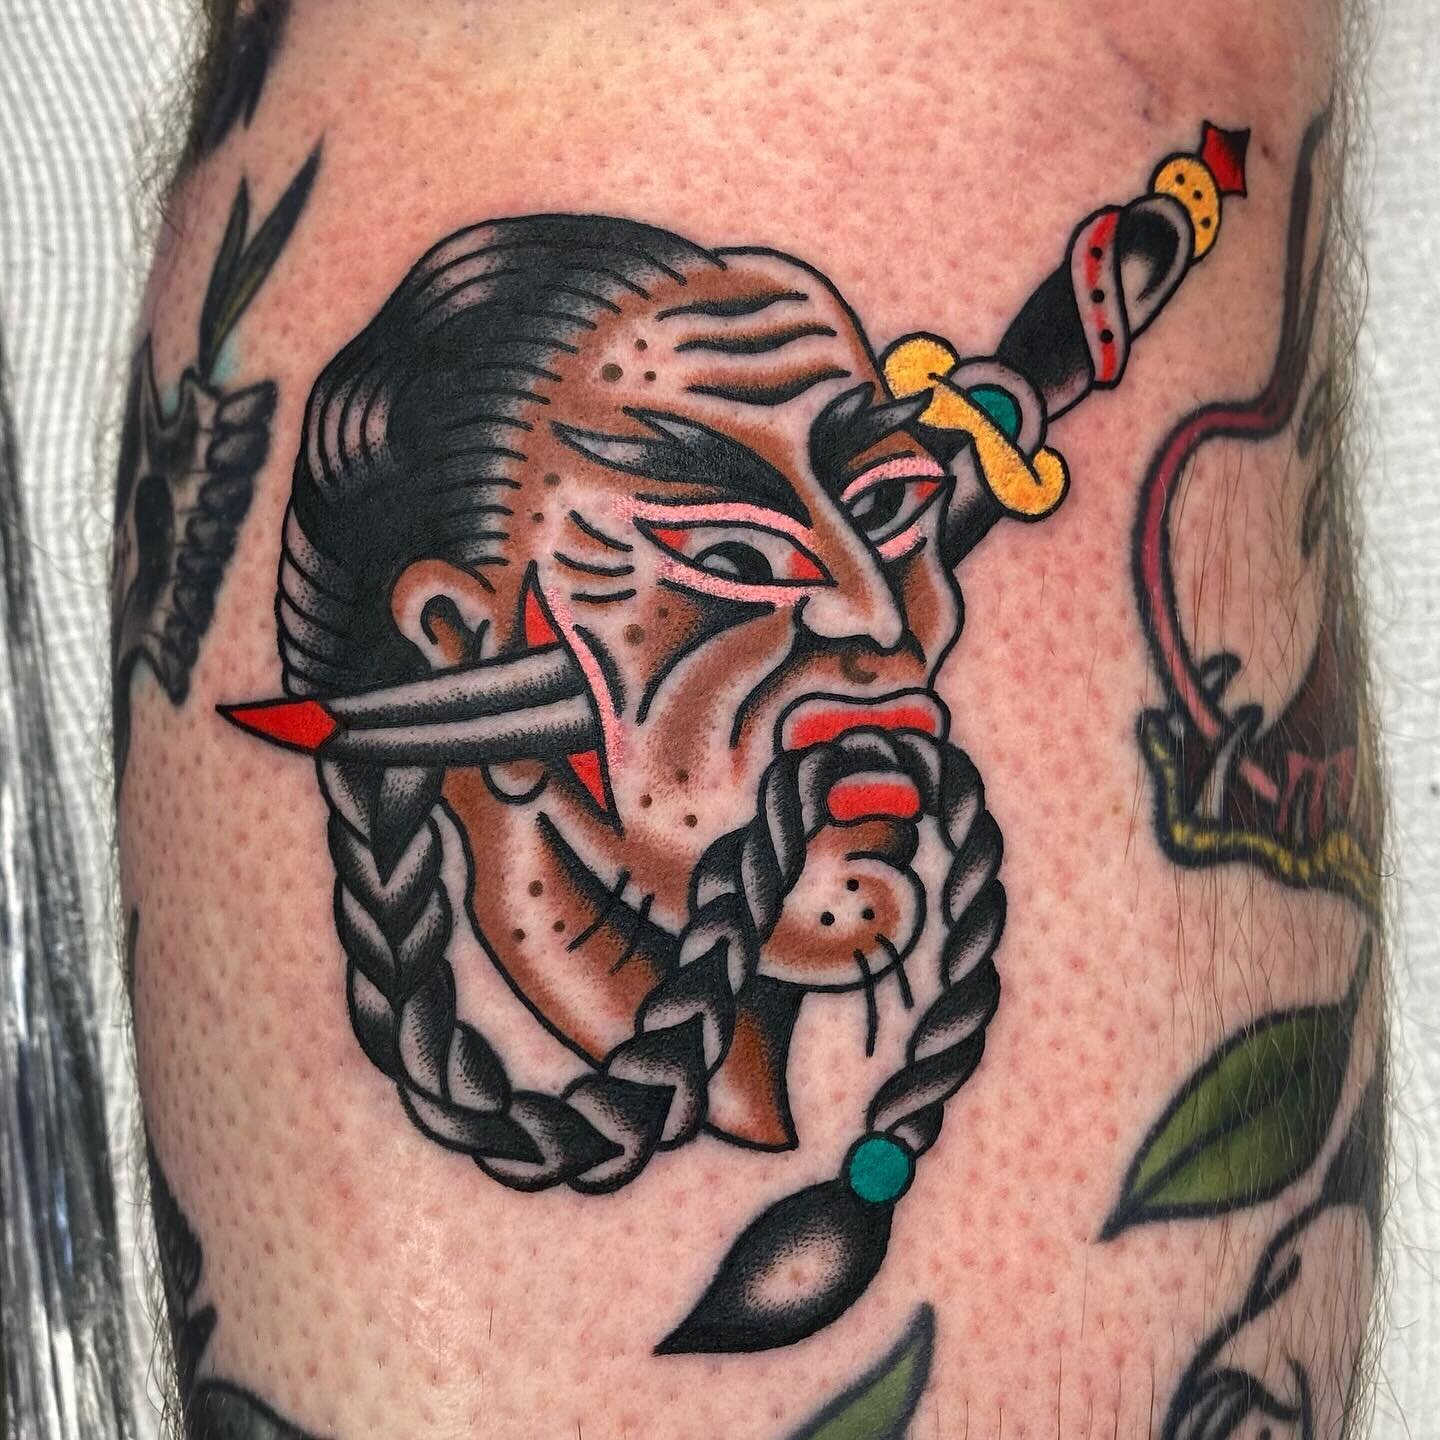 Knife fight from my flash for @tonypepperztattoo thanks heaps for getting this one legend! Made at @mans_ruin_tattoo